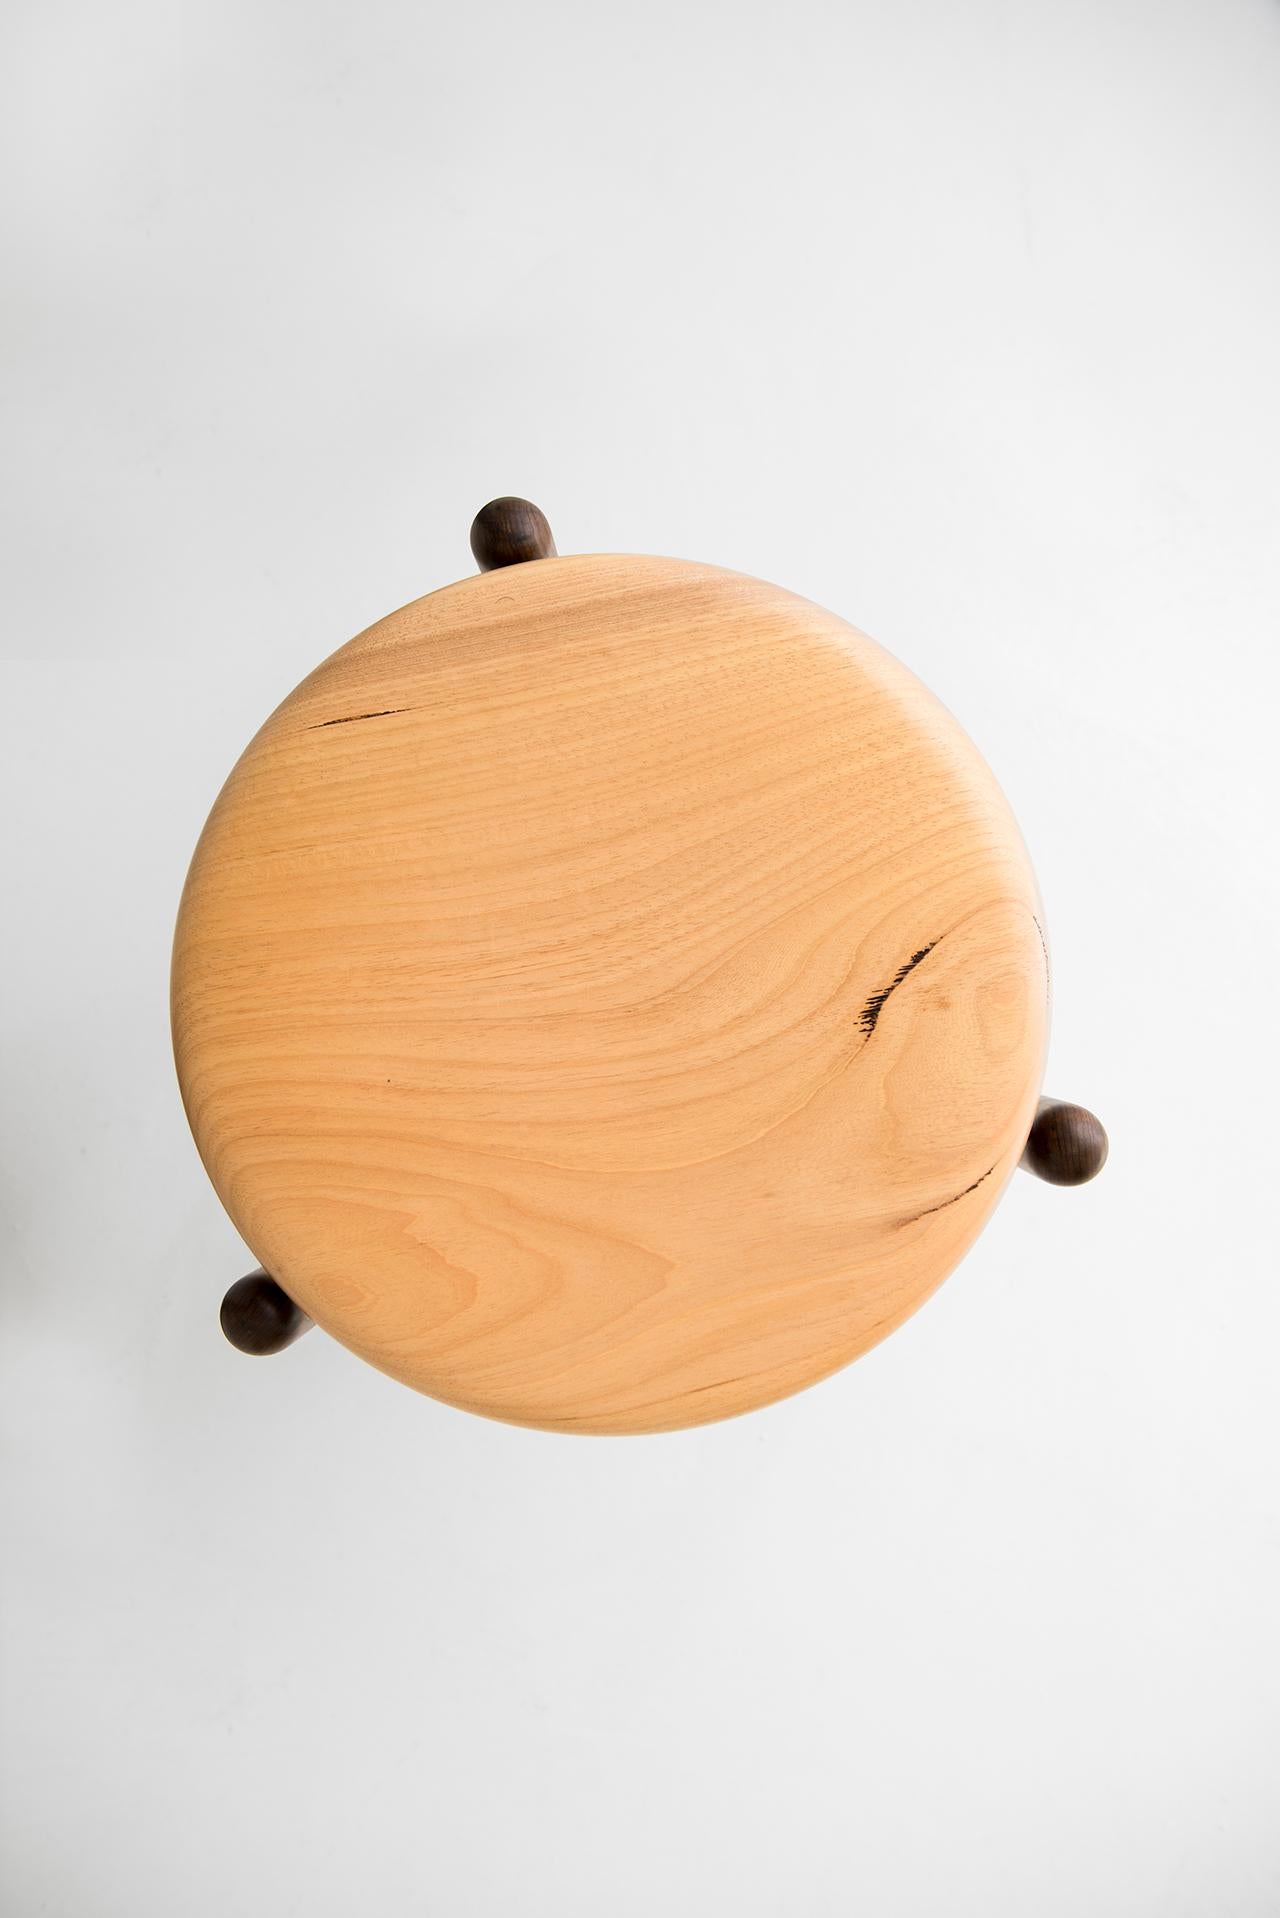 Brass and Wood Sculpted Stool by Leandro Garcia Contemporary Brazil Design For Sale 1